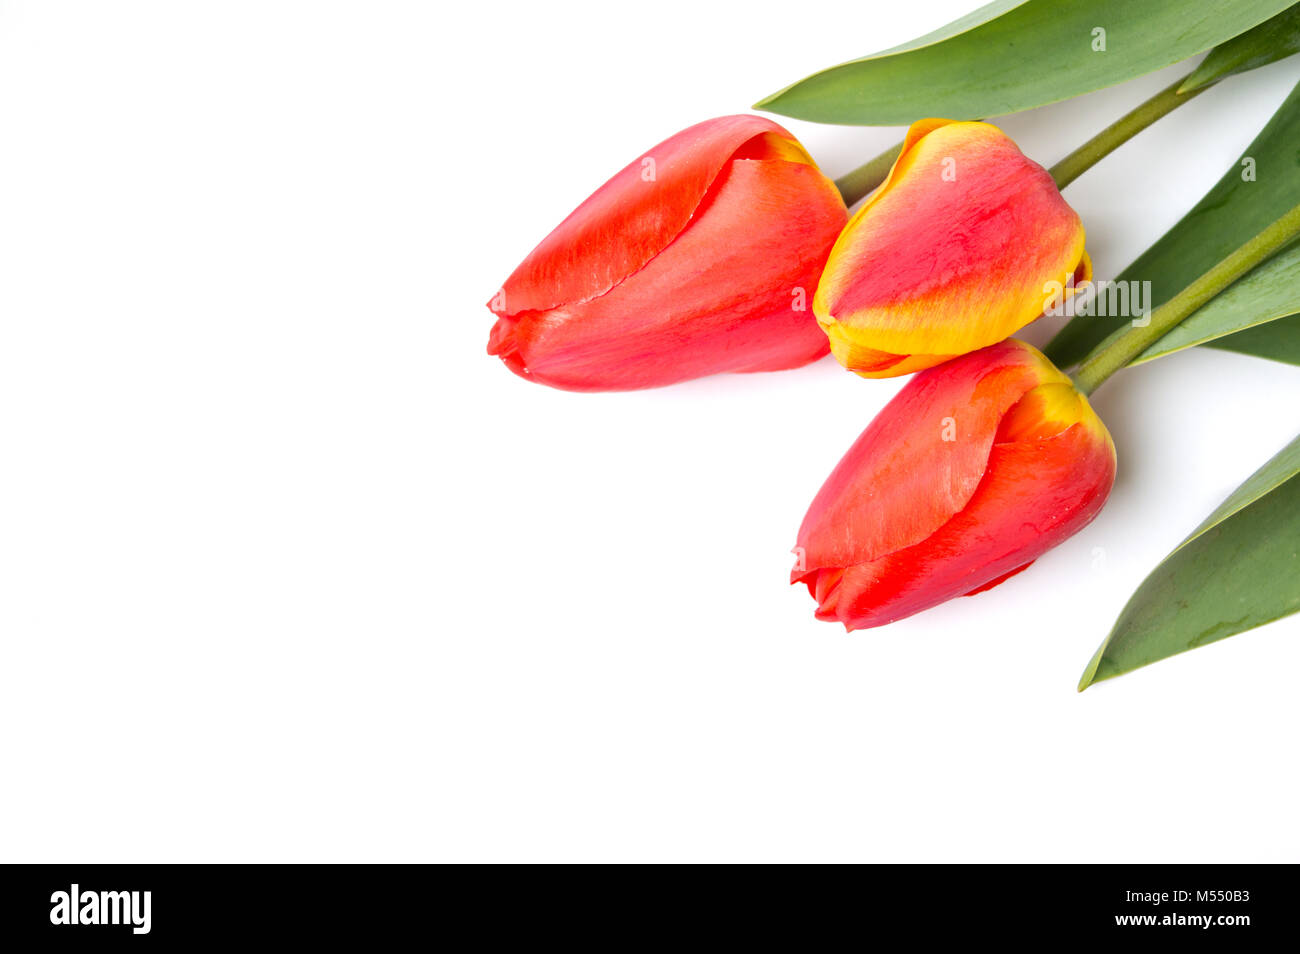 Red tulips isolated on white background. Spring time Stock Photo